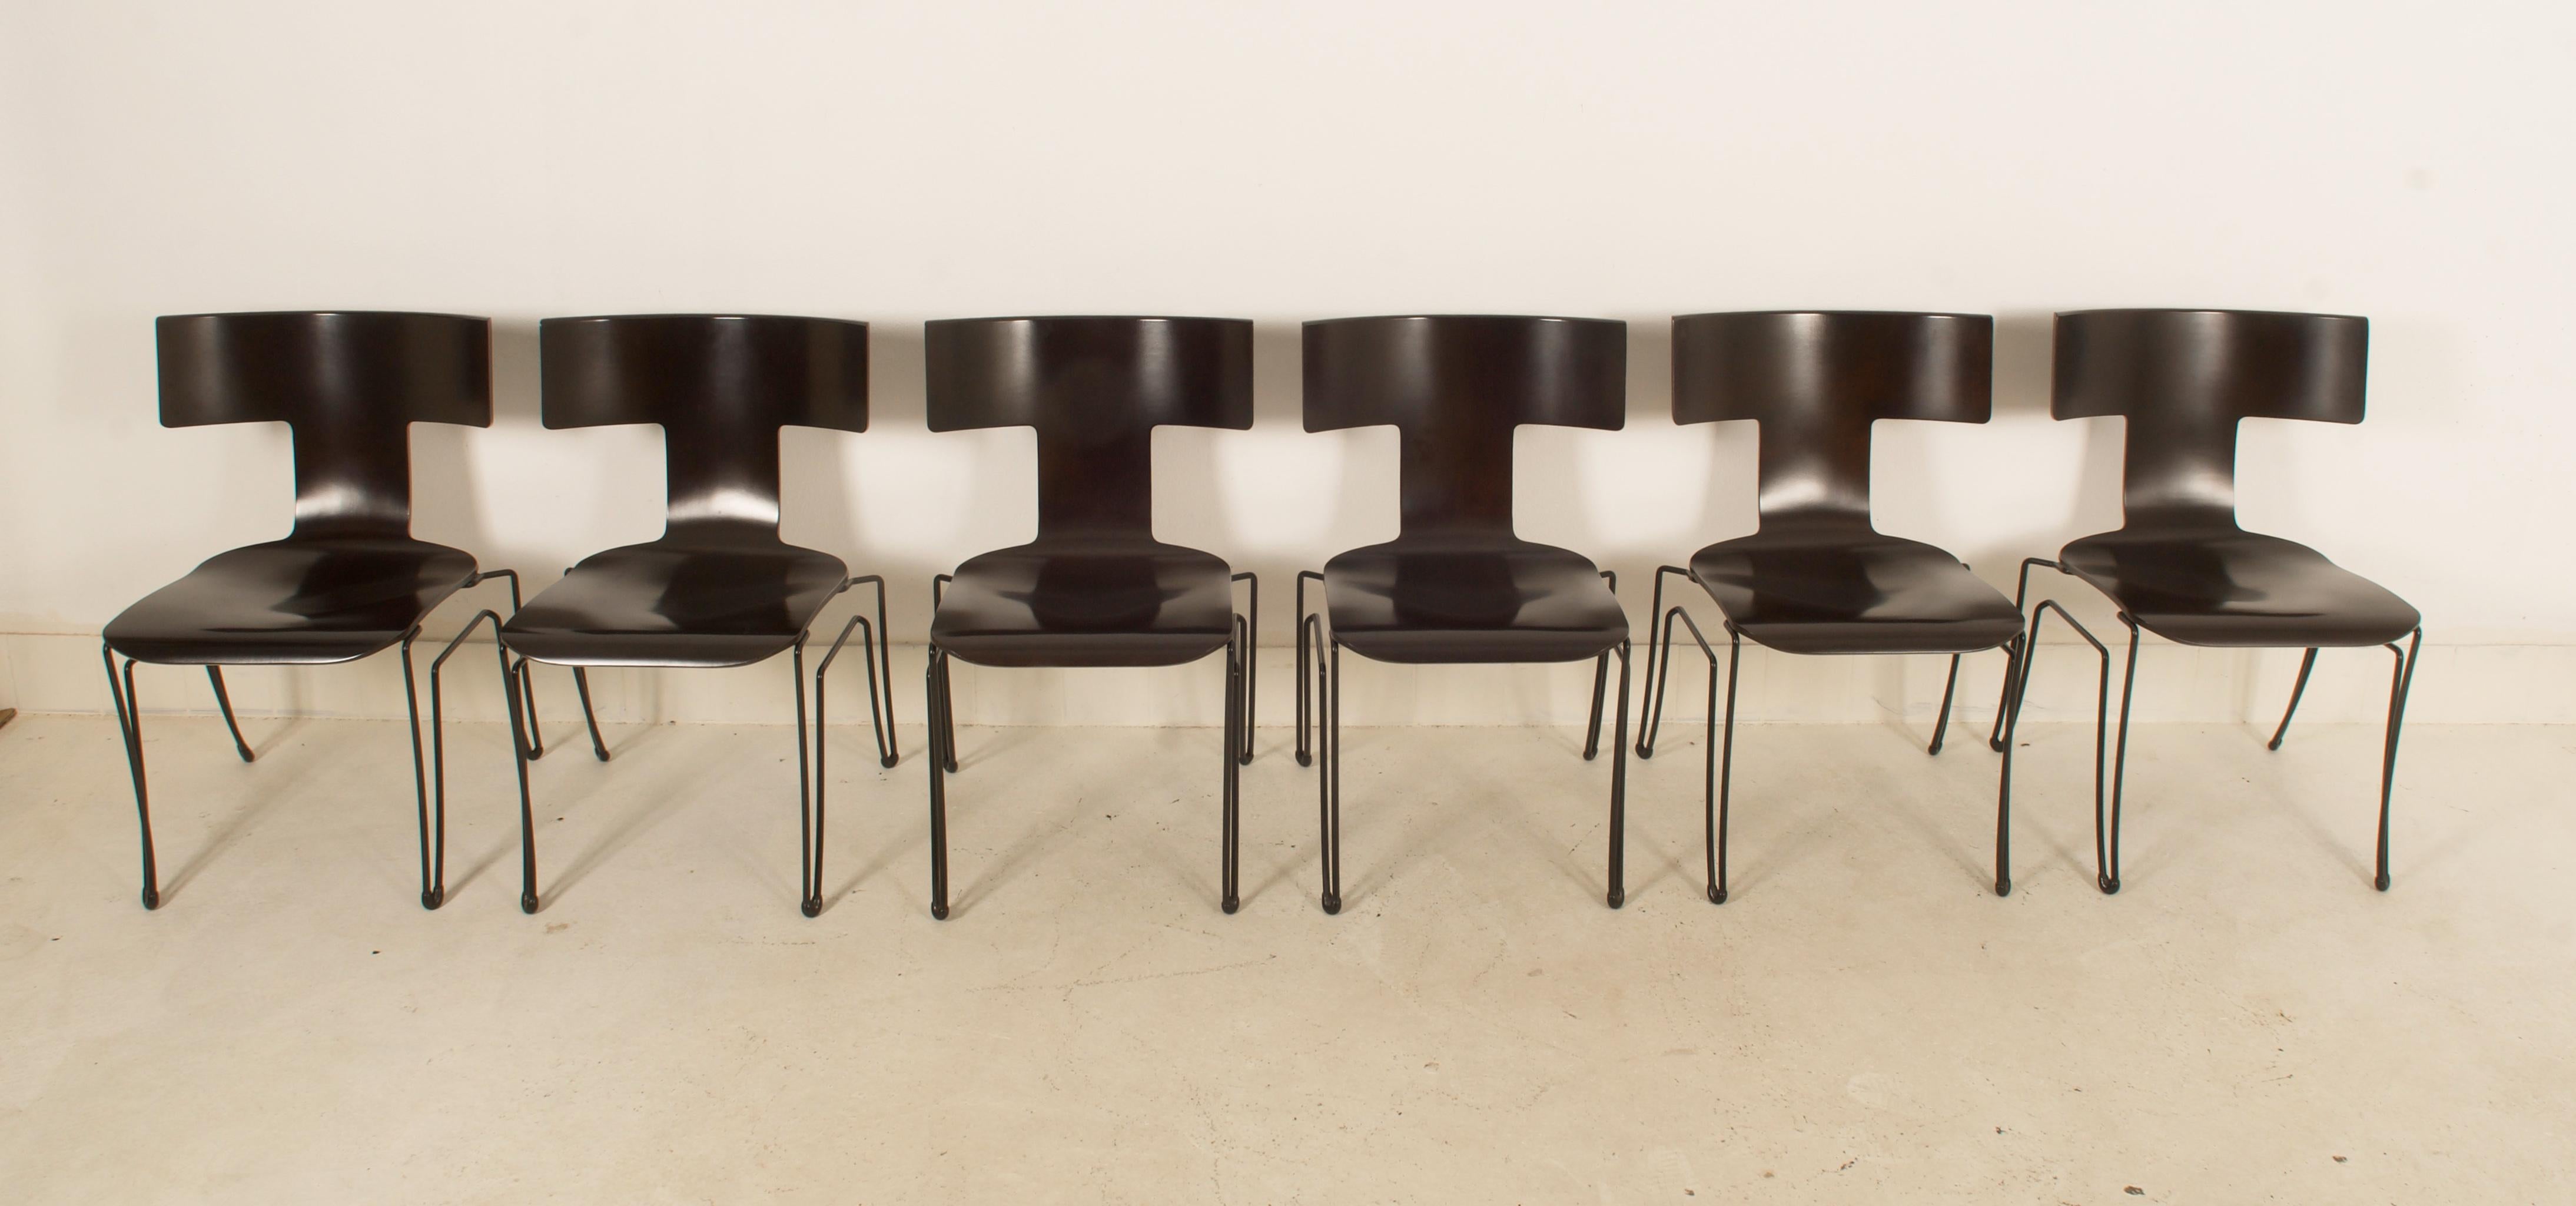 This set of 12 chairs was produced by Donghia in the 1980s. The model Anziano was designed by John Hutton. The structures are made of black coated steelwire, the seats are made of moulded beechwood veneer. The chairs are stackable. Very good used